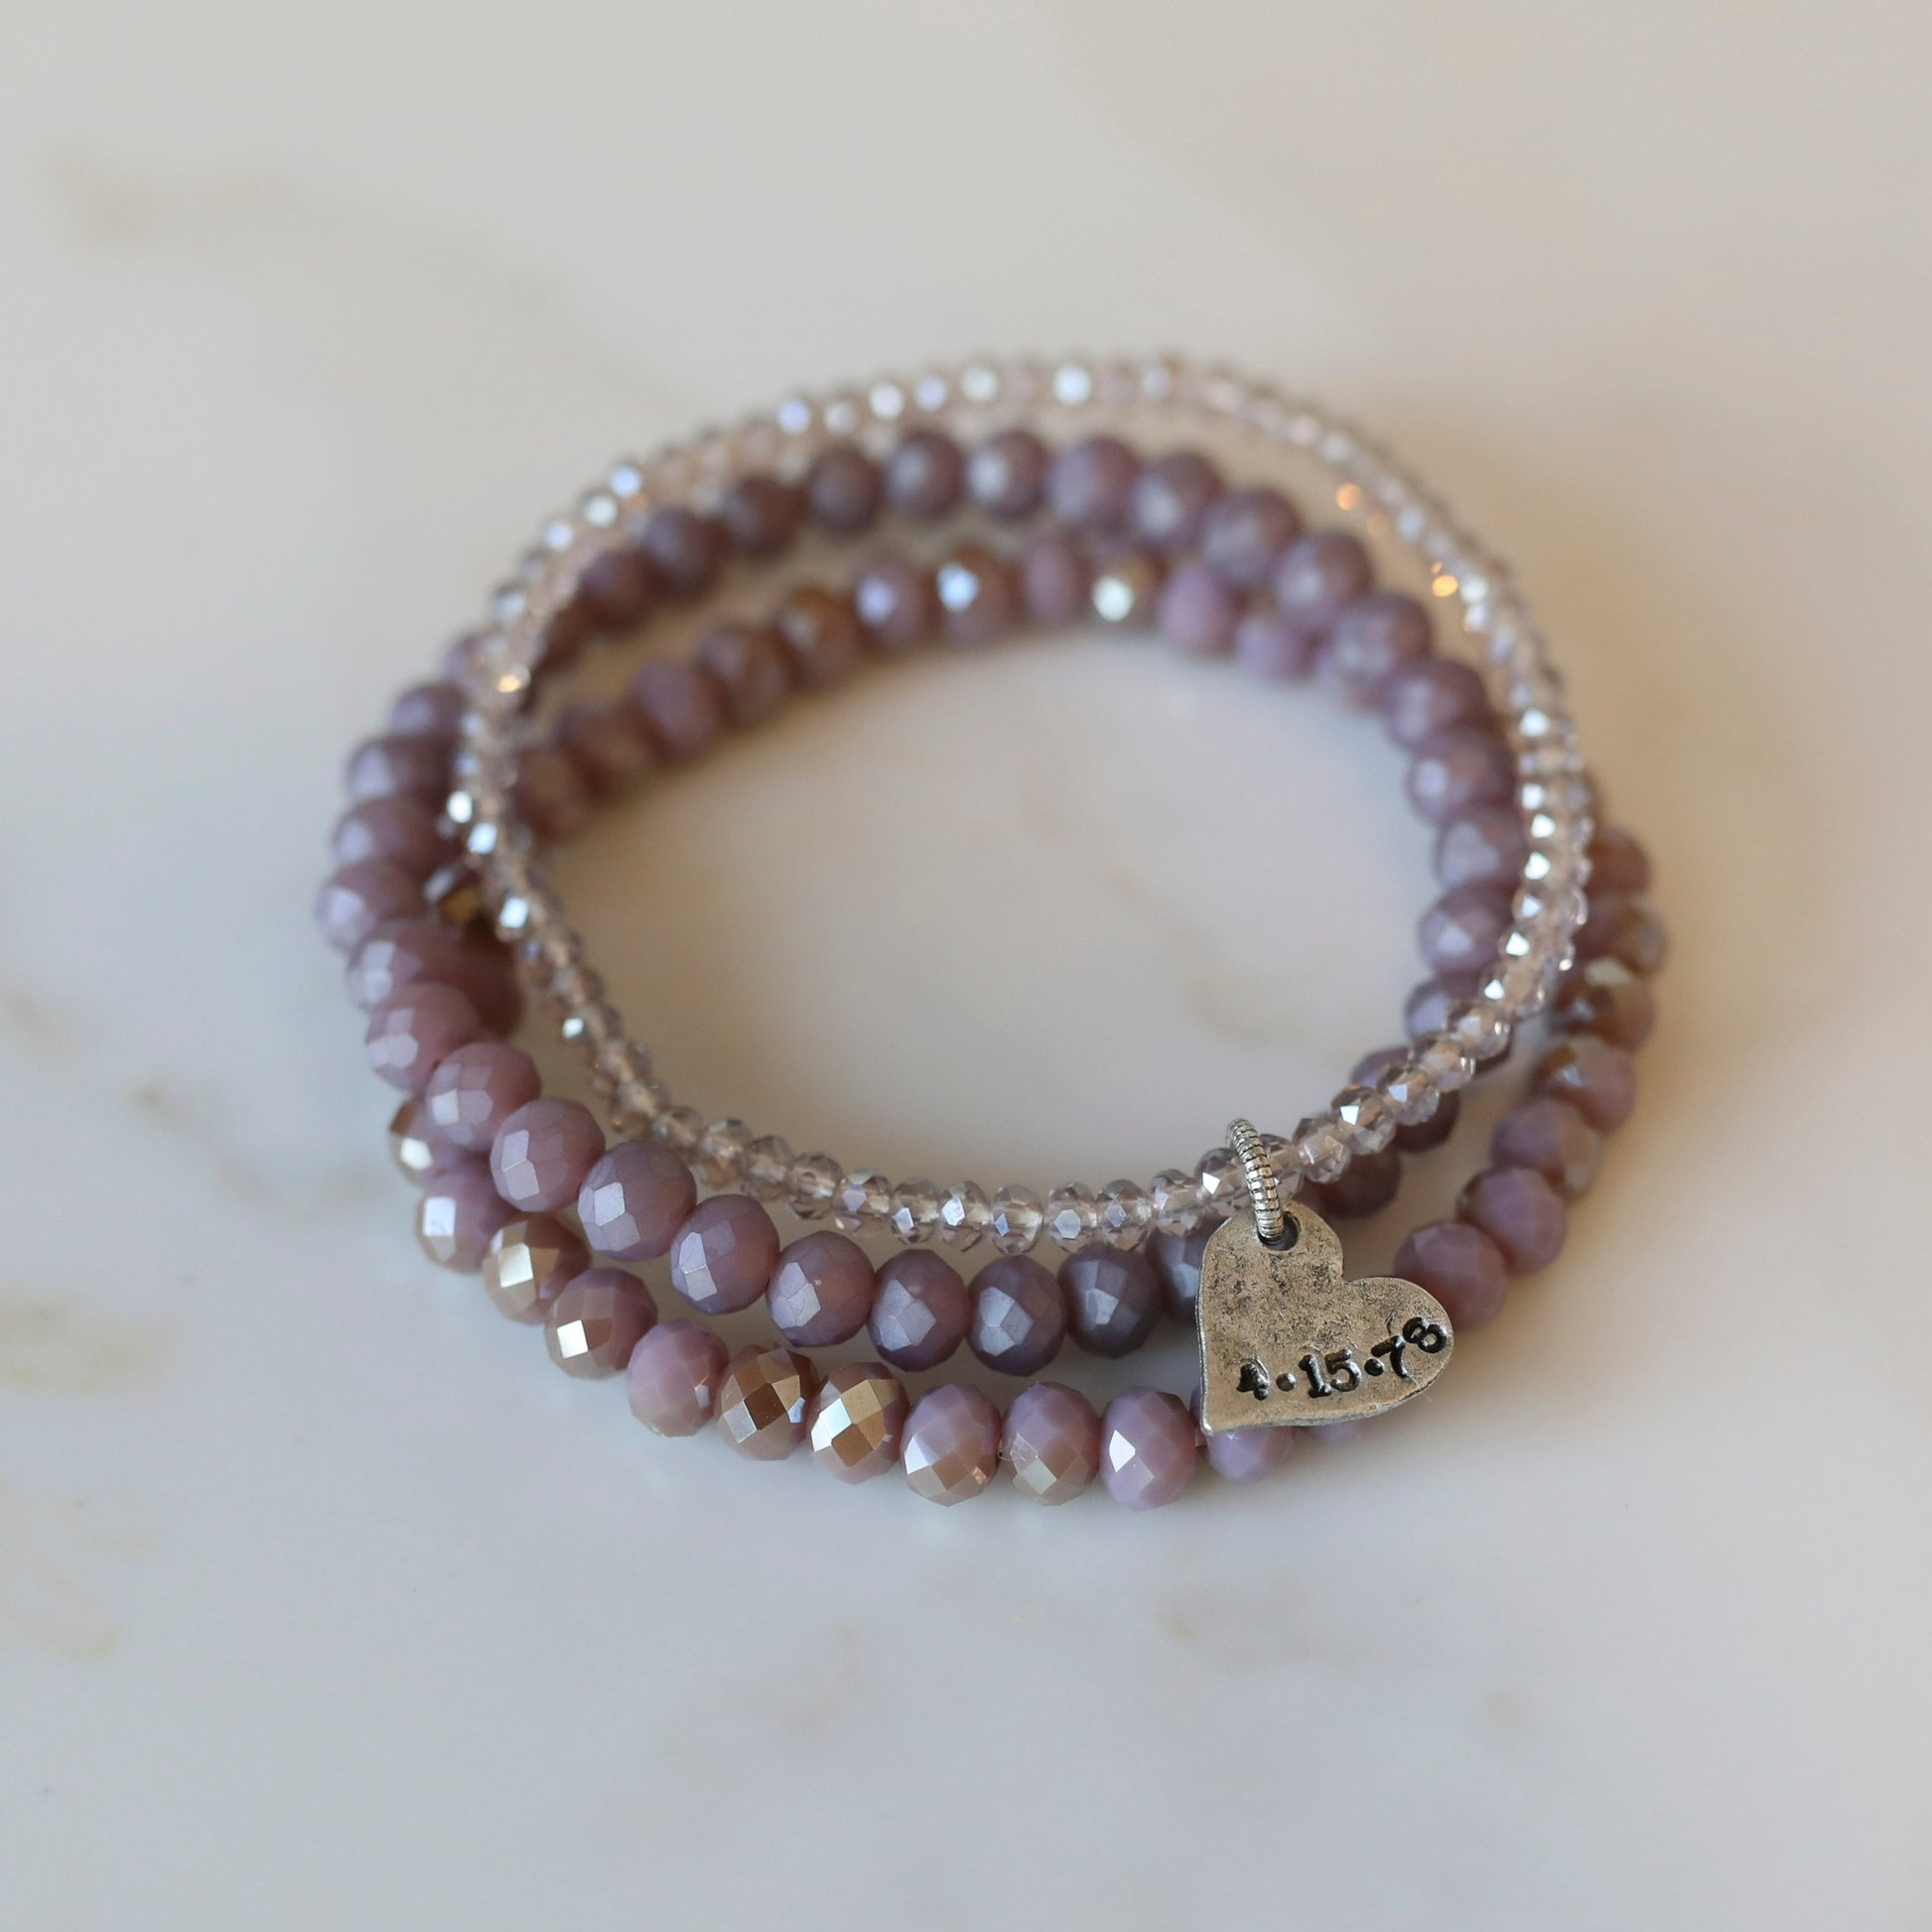 Anniversary Stack Bracelets with Crystal Beads - Purple Mix